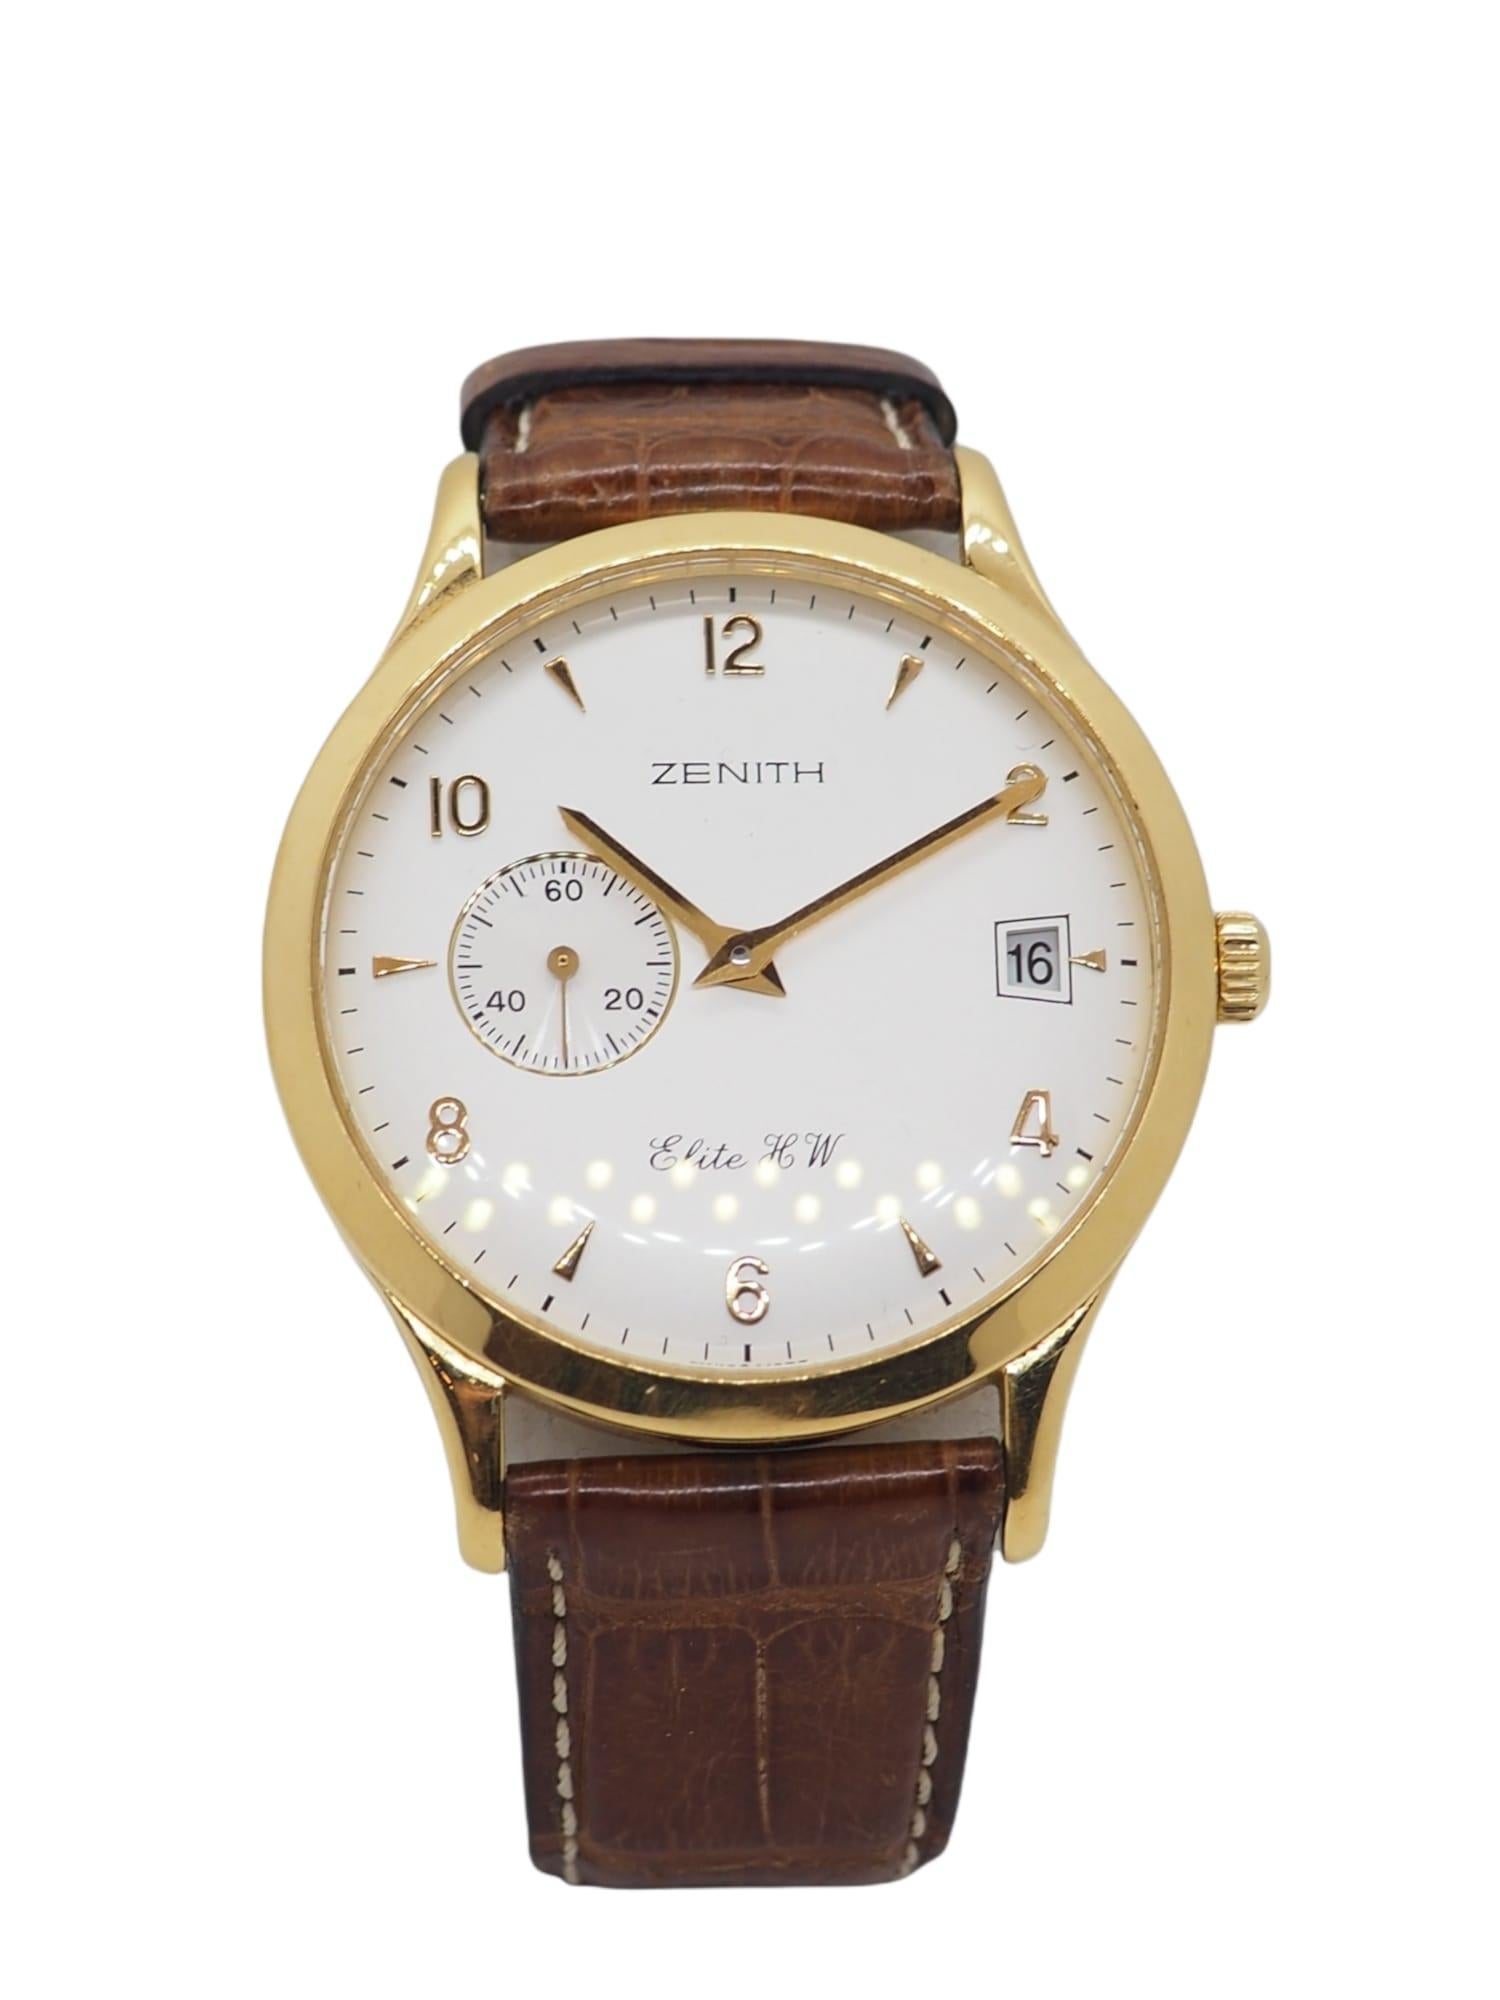 Indulge in the timeless allure of vintage luxury with our exquisite Zenith Elite HW timepiece. Crafted in 18K gold and adorned with a luxurious brown alligator strap, this watch exudes sophistication and refinement, making it a treasured addition to